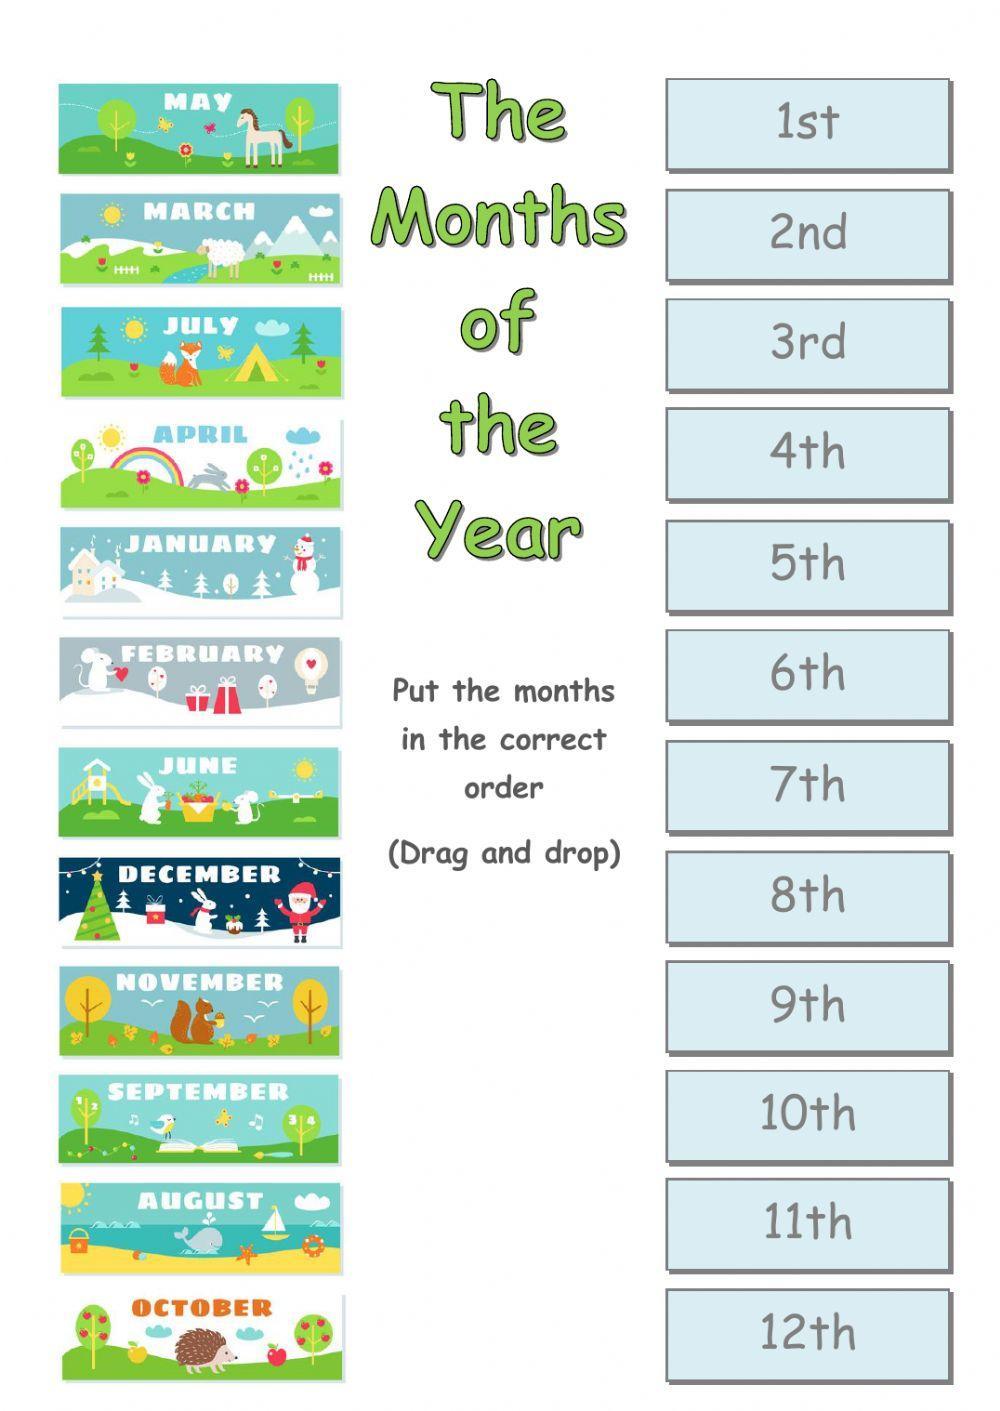 Ficha interactiva The months of the year